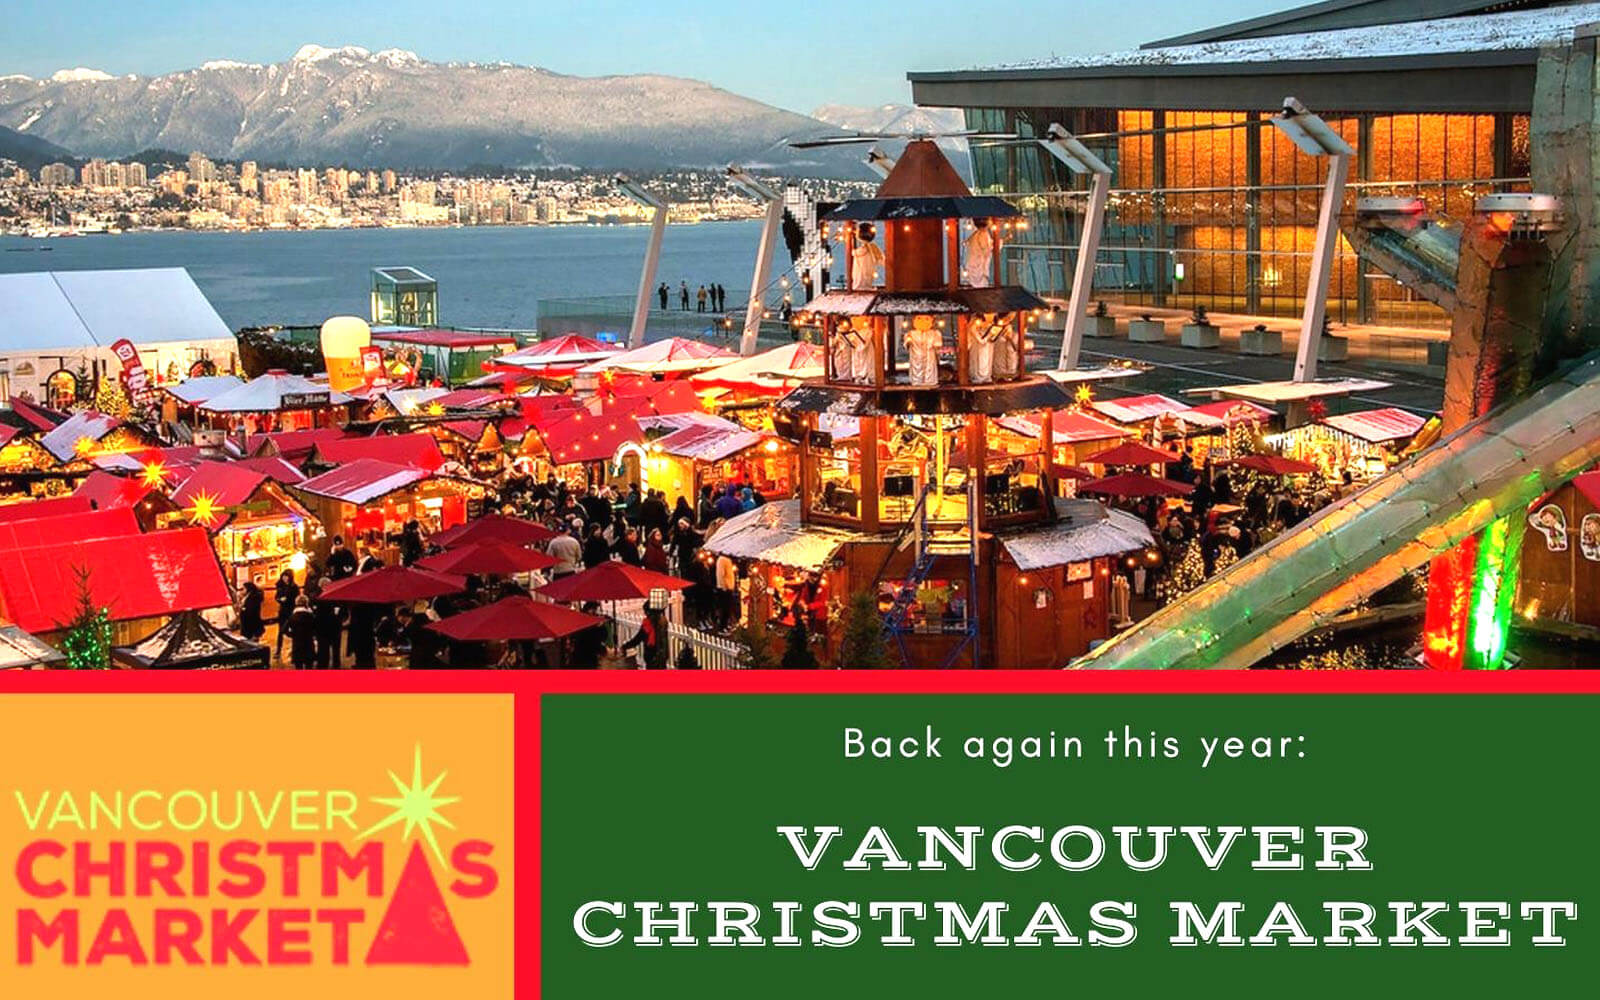 THE VANCOUVER CHRISTMAS MARKET IS BACK FOR THE HOLIDAY SEASON 2021!